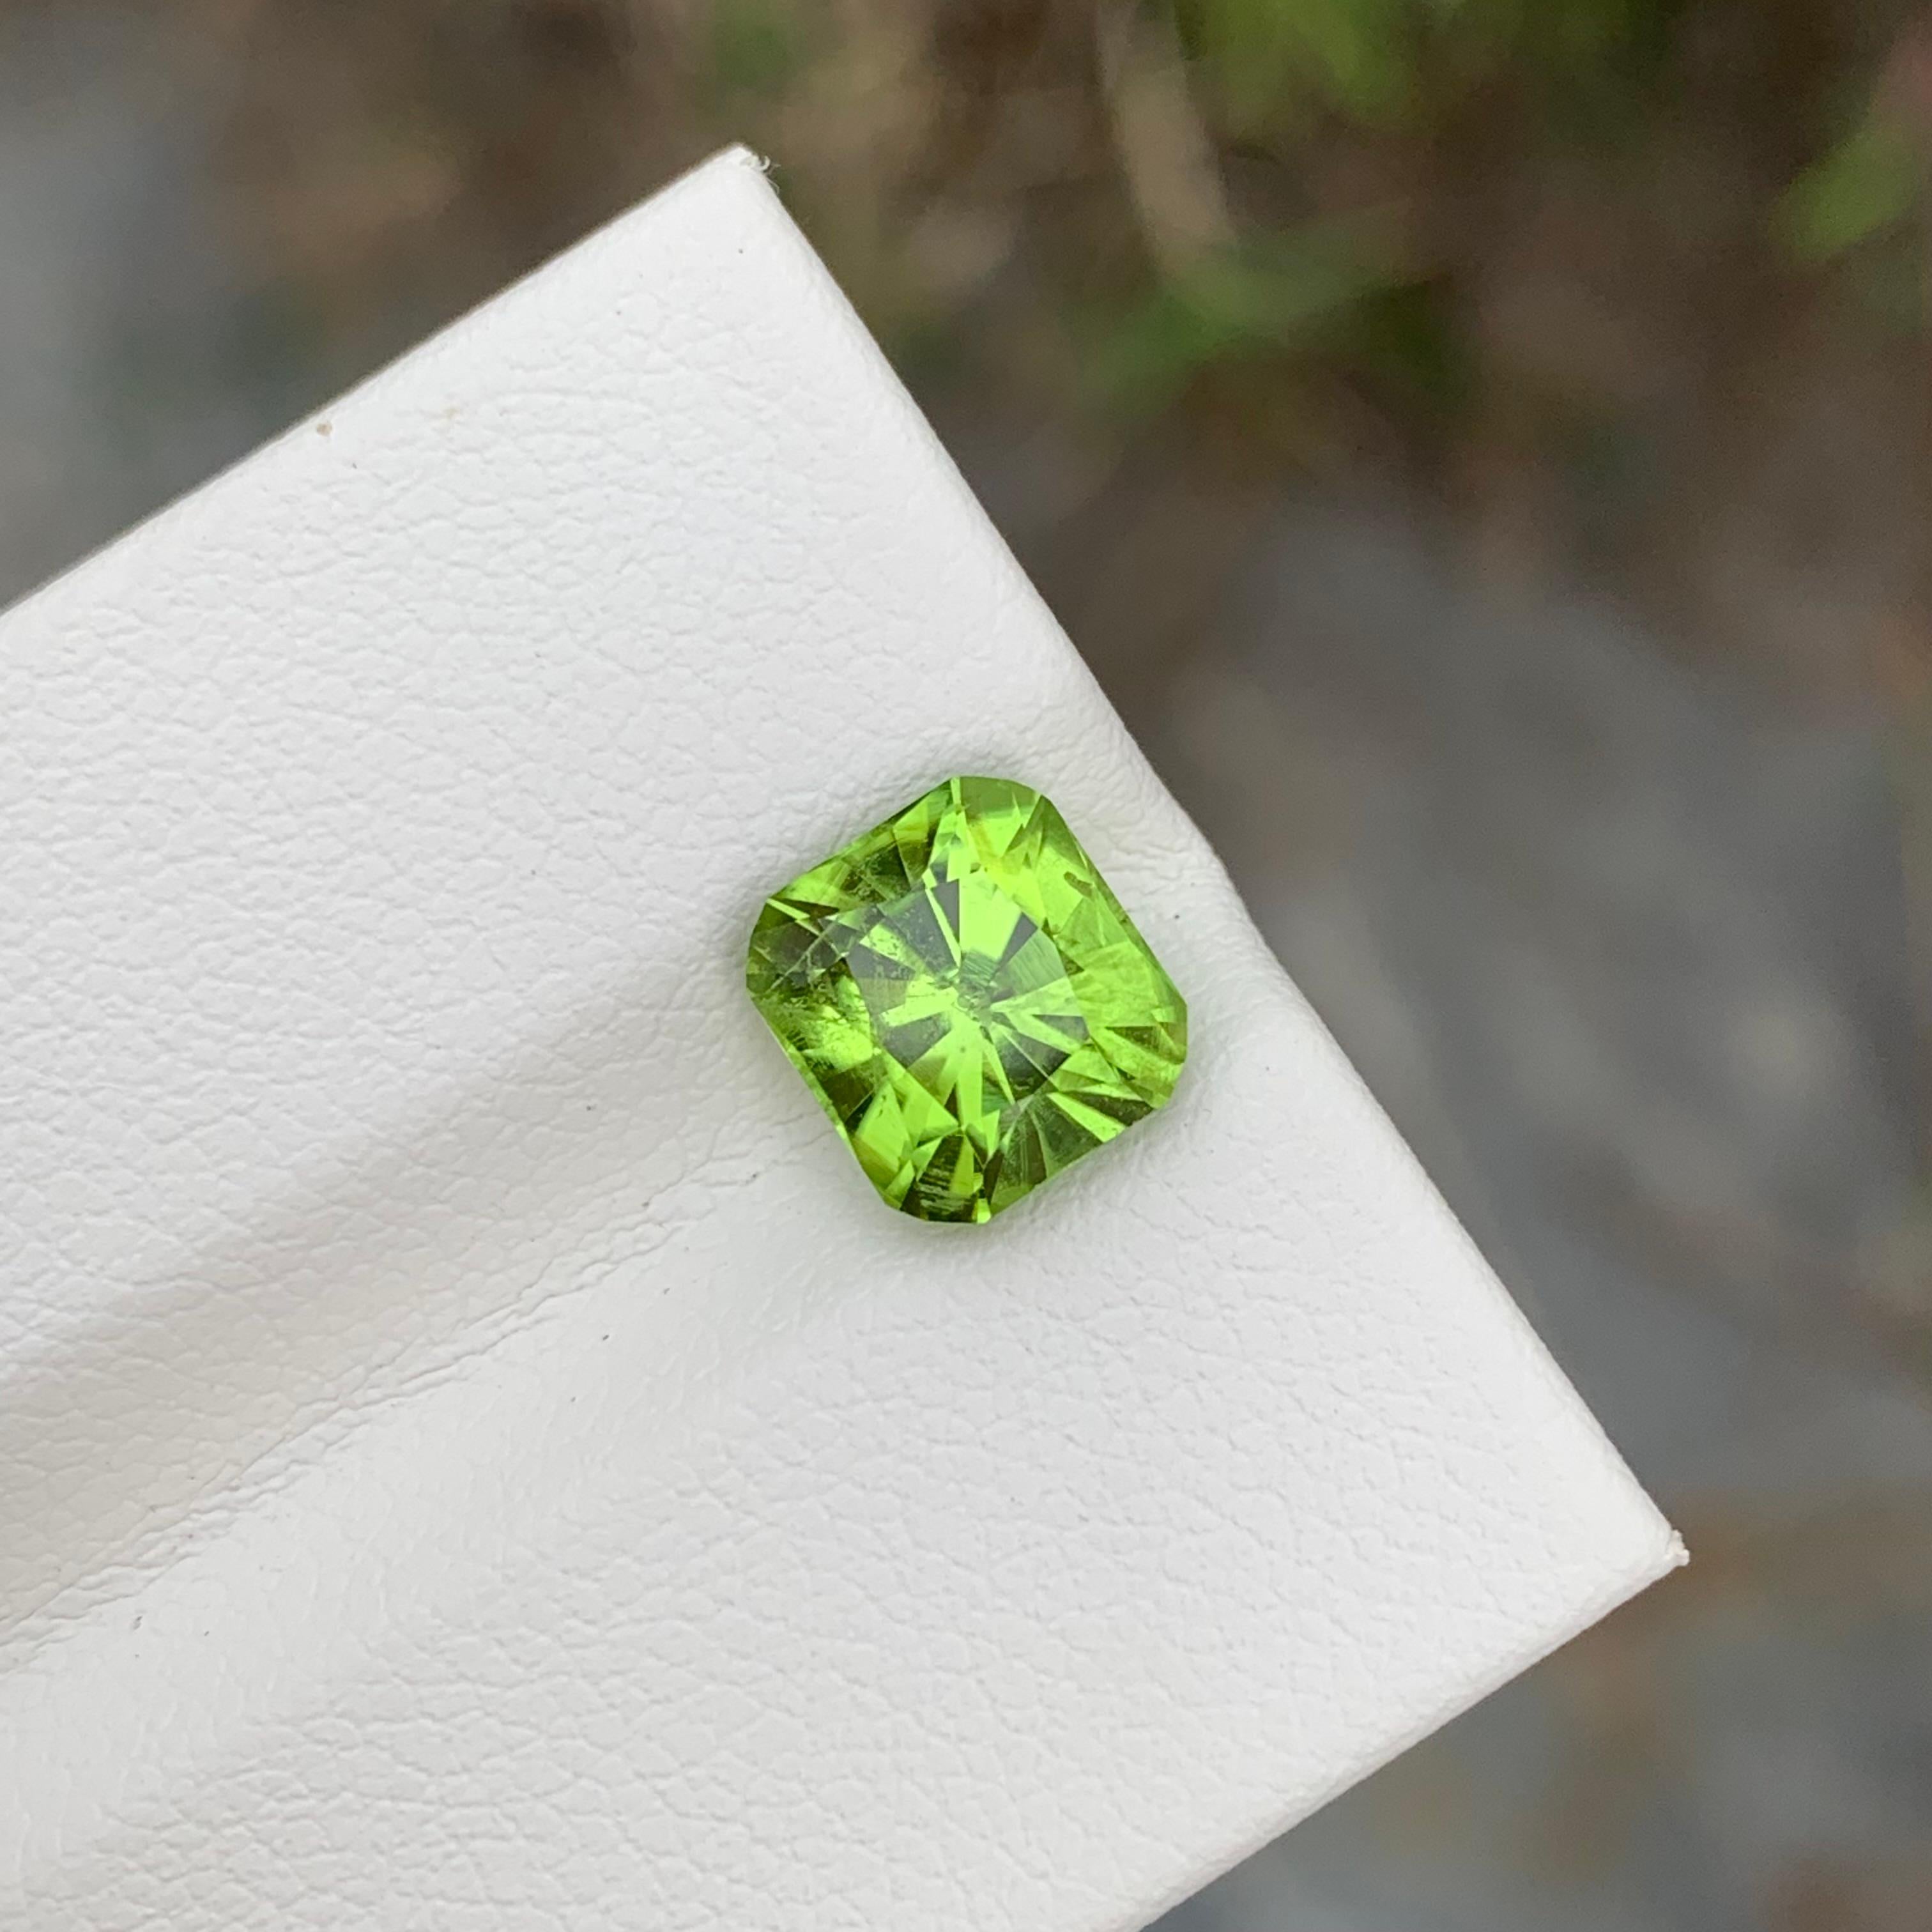 Loose Peridot
Weight: 2.40 Carats
Dimension: 7.7 x 7.1 x 5.3 Mm
Colour: Green
Origin: Supat Valley, Pakistan
Shape: Cushion 
Certificate: On Demand
Treatment: Non

Peridot, a vibrant and lustrous gemstone, has been cherished for centuries for its